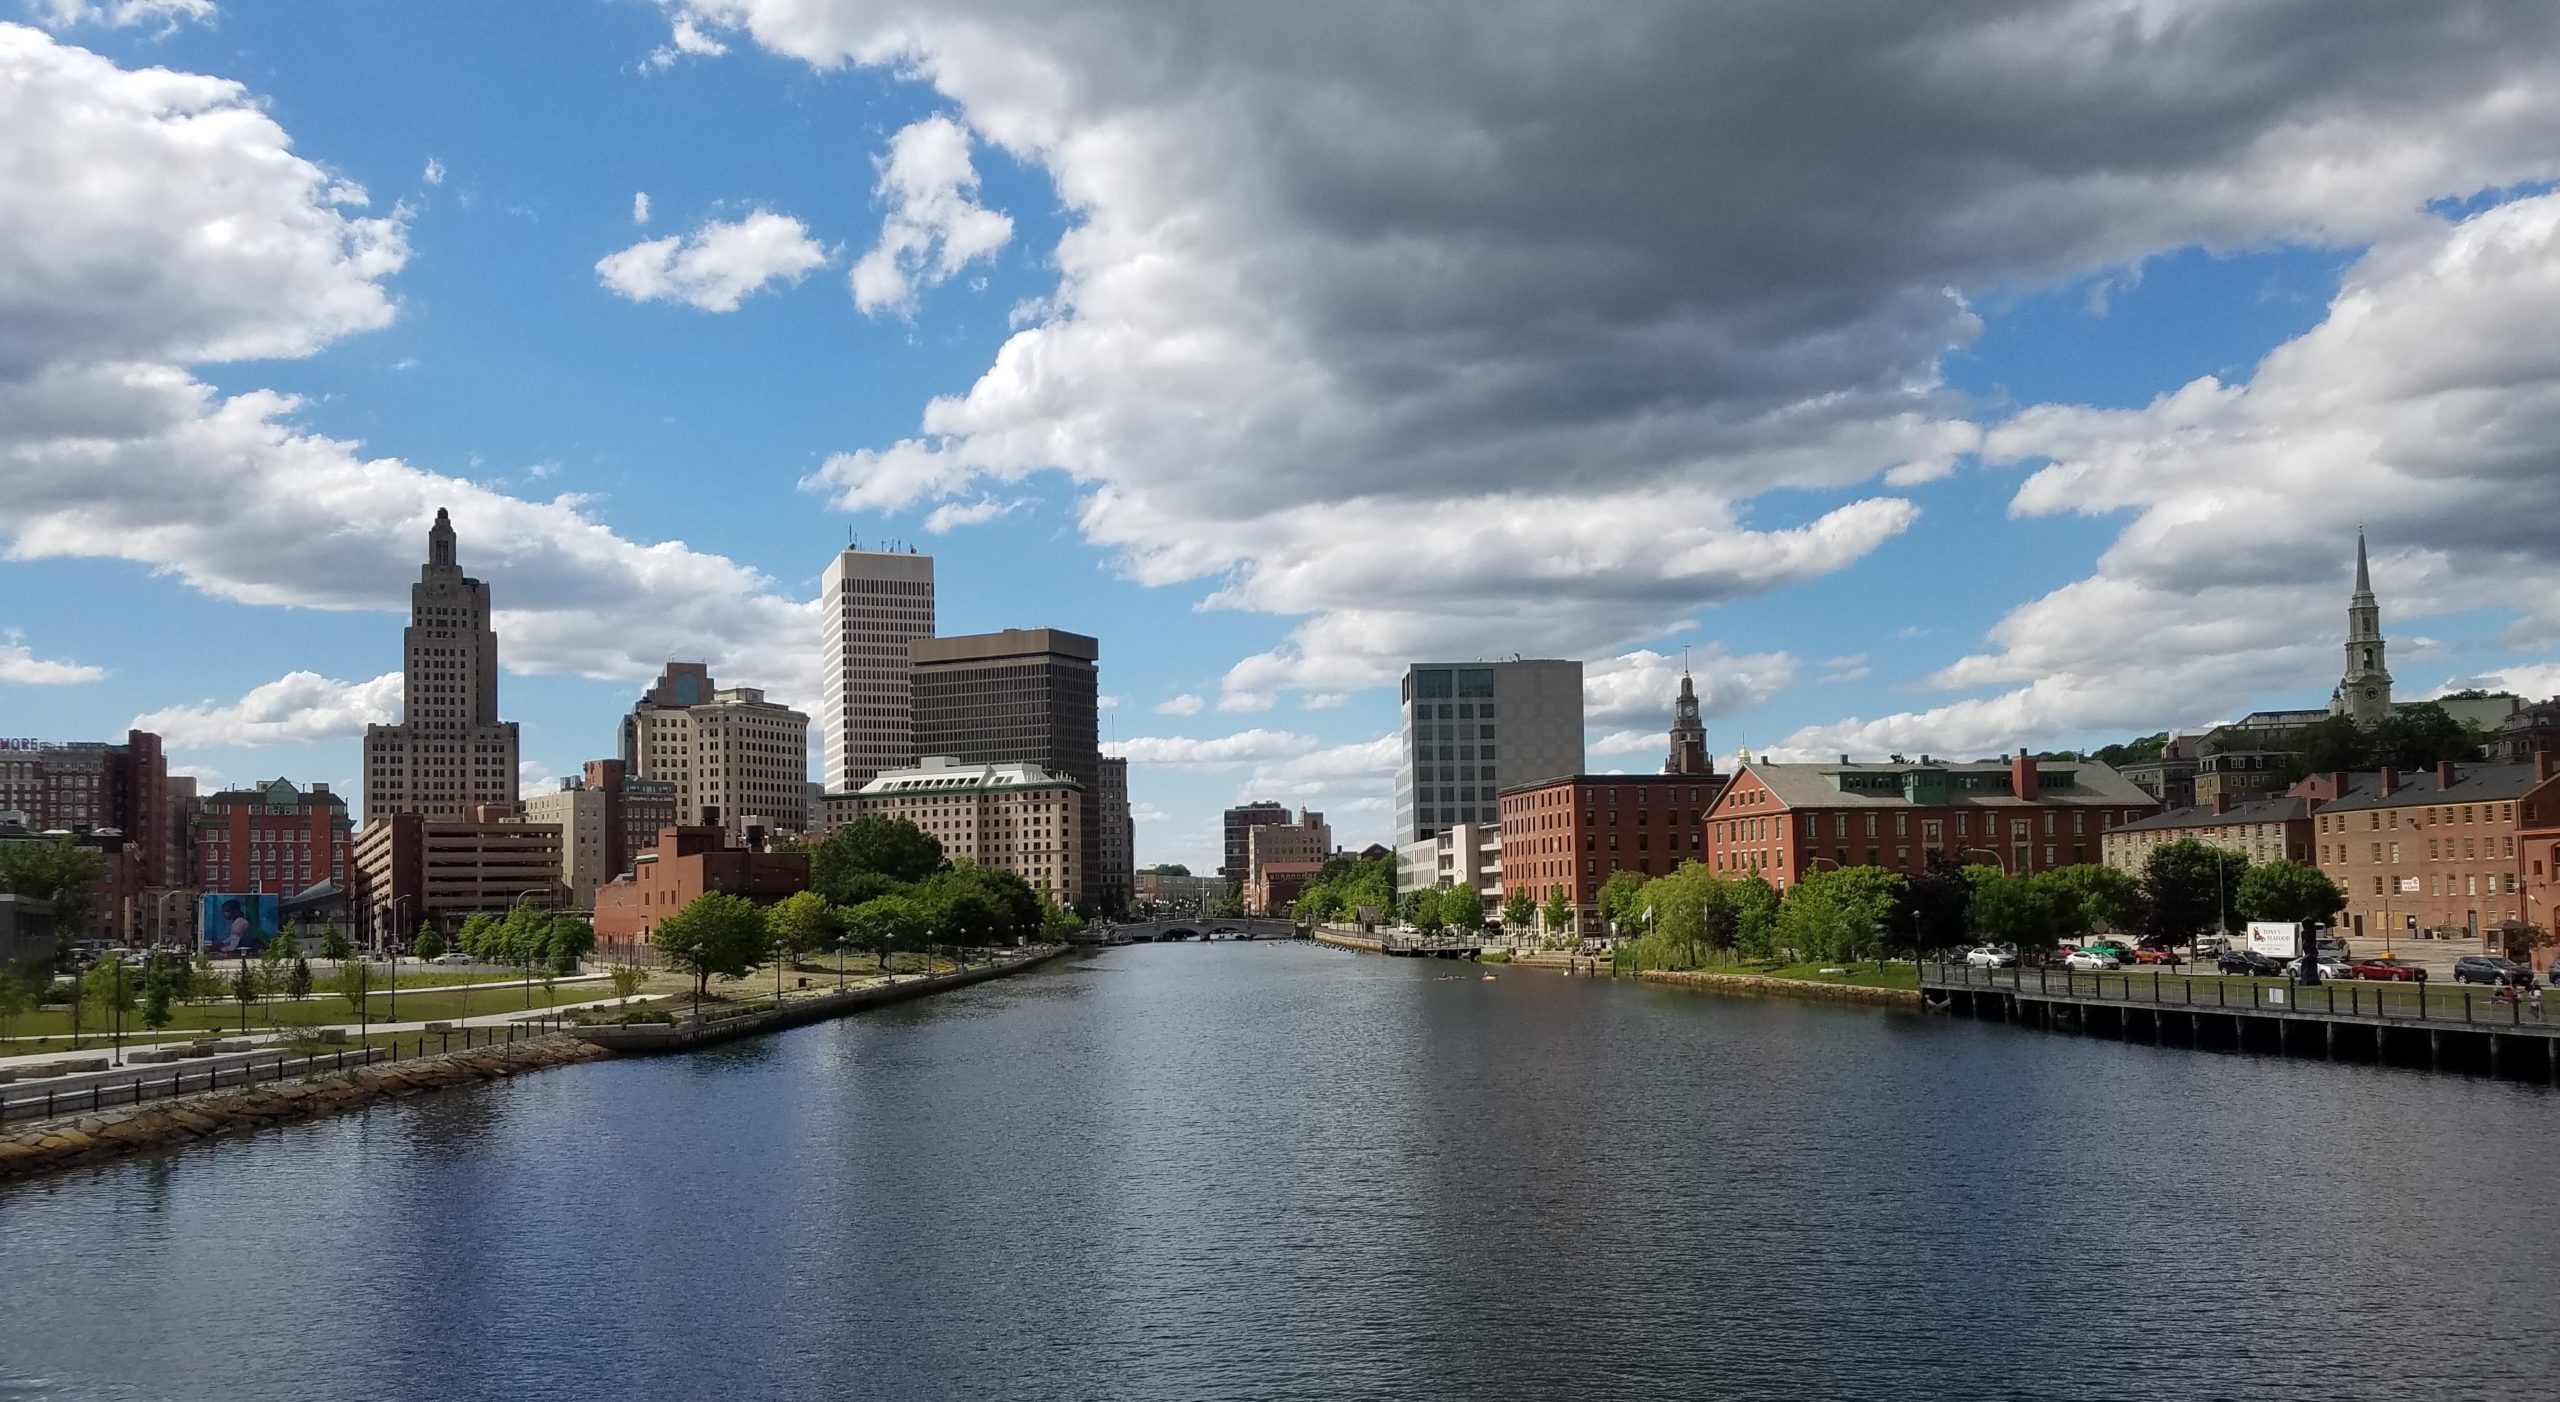 View of Providence from the Providence River Pedestrian Bridge. Photo by Bonnie Combs.